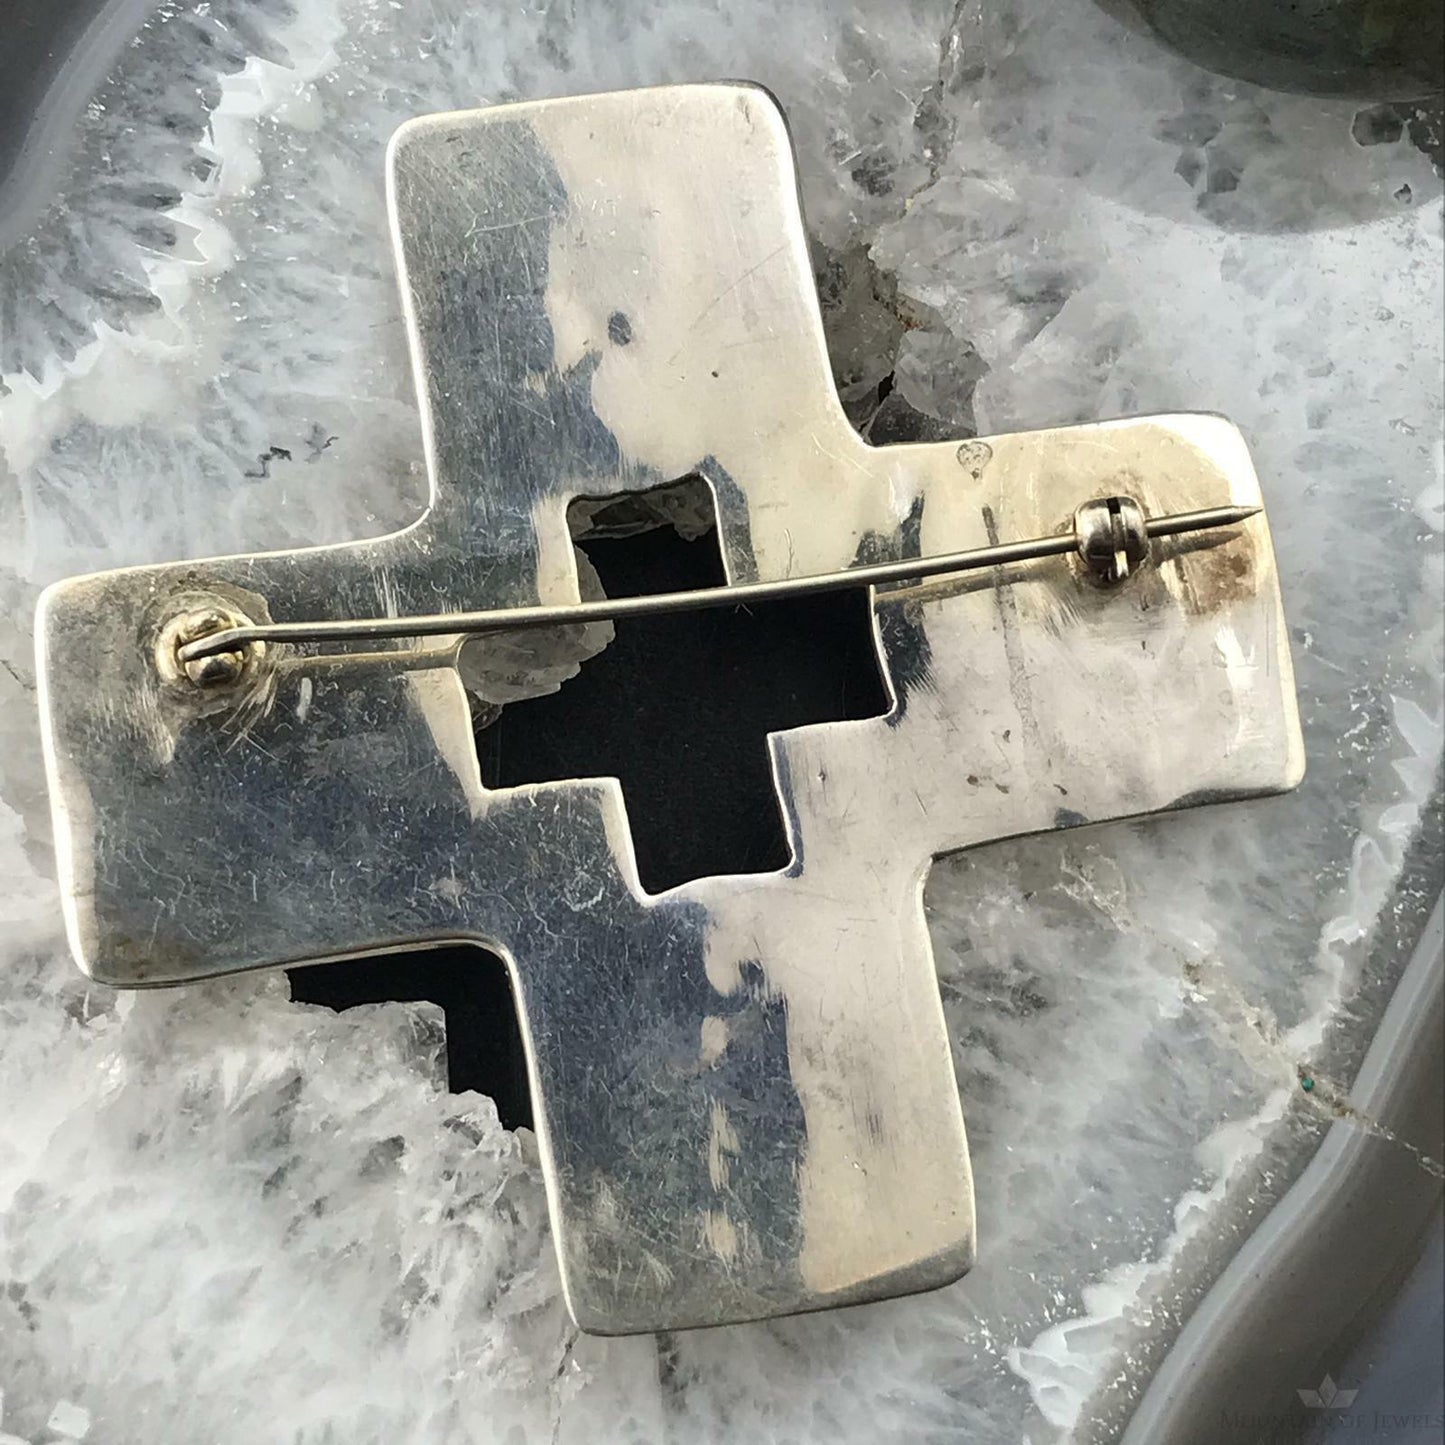 Silver Stamped Cross Brooch For Women or Men, Catholic Gift Religious Symbol